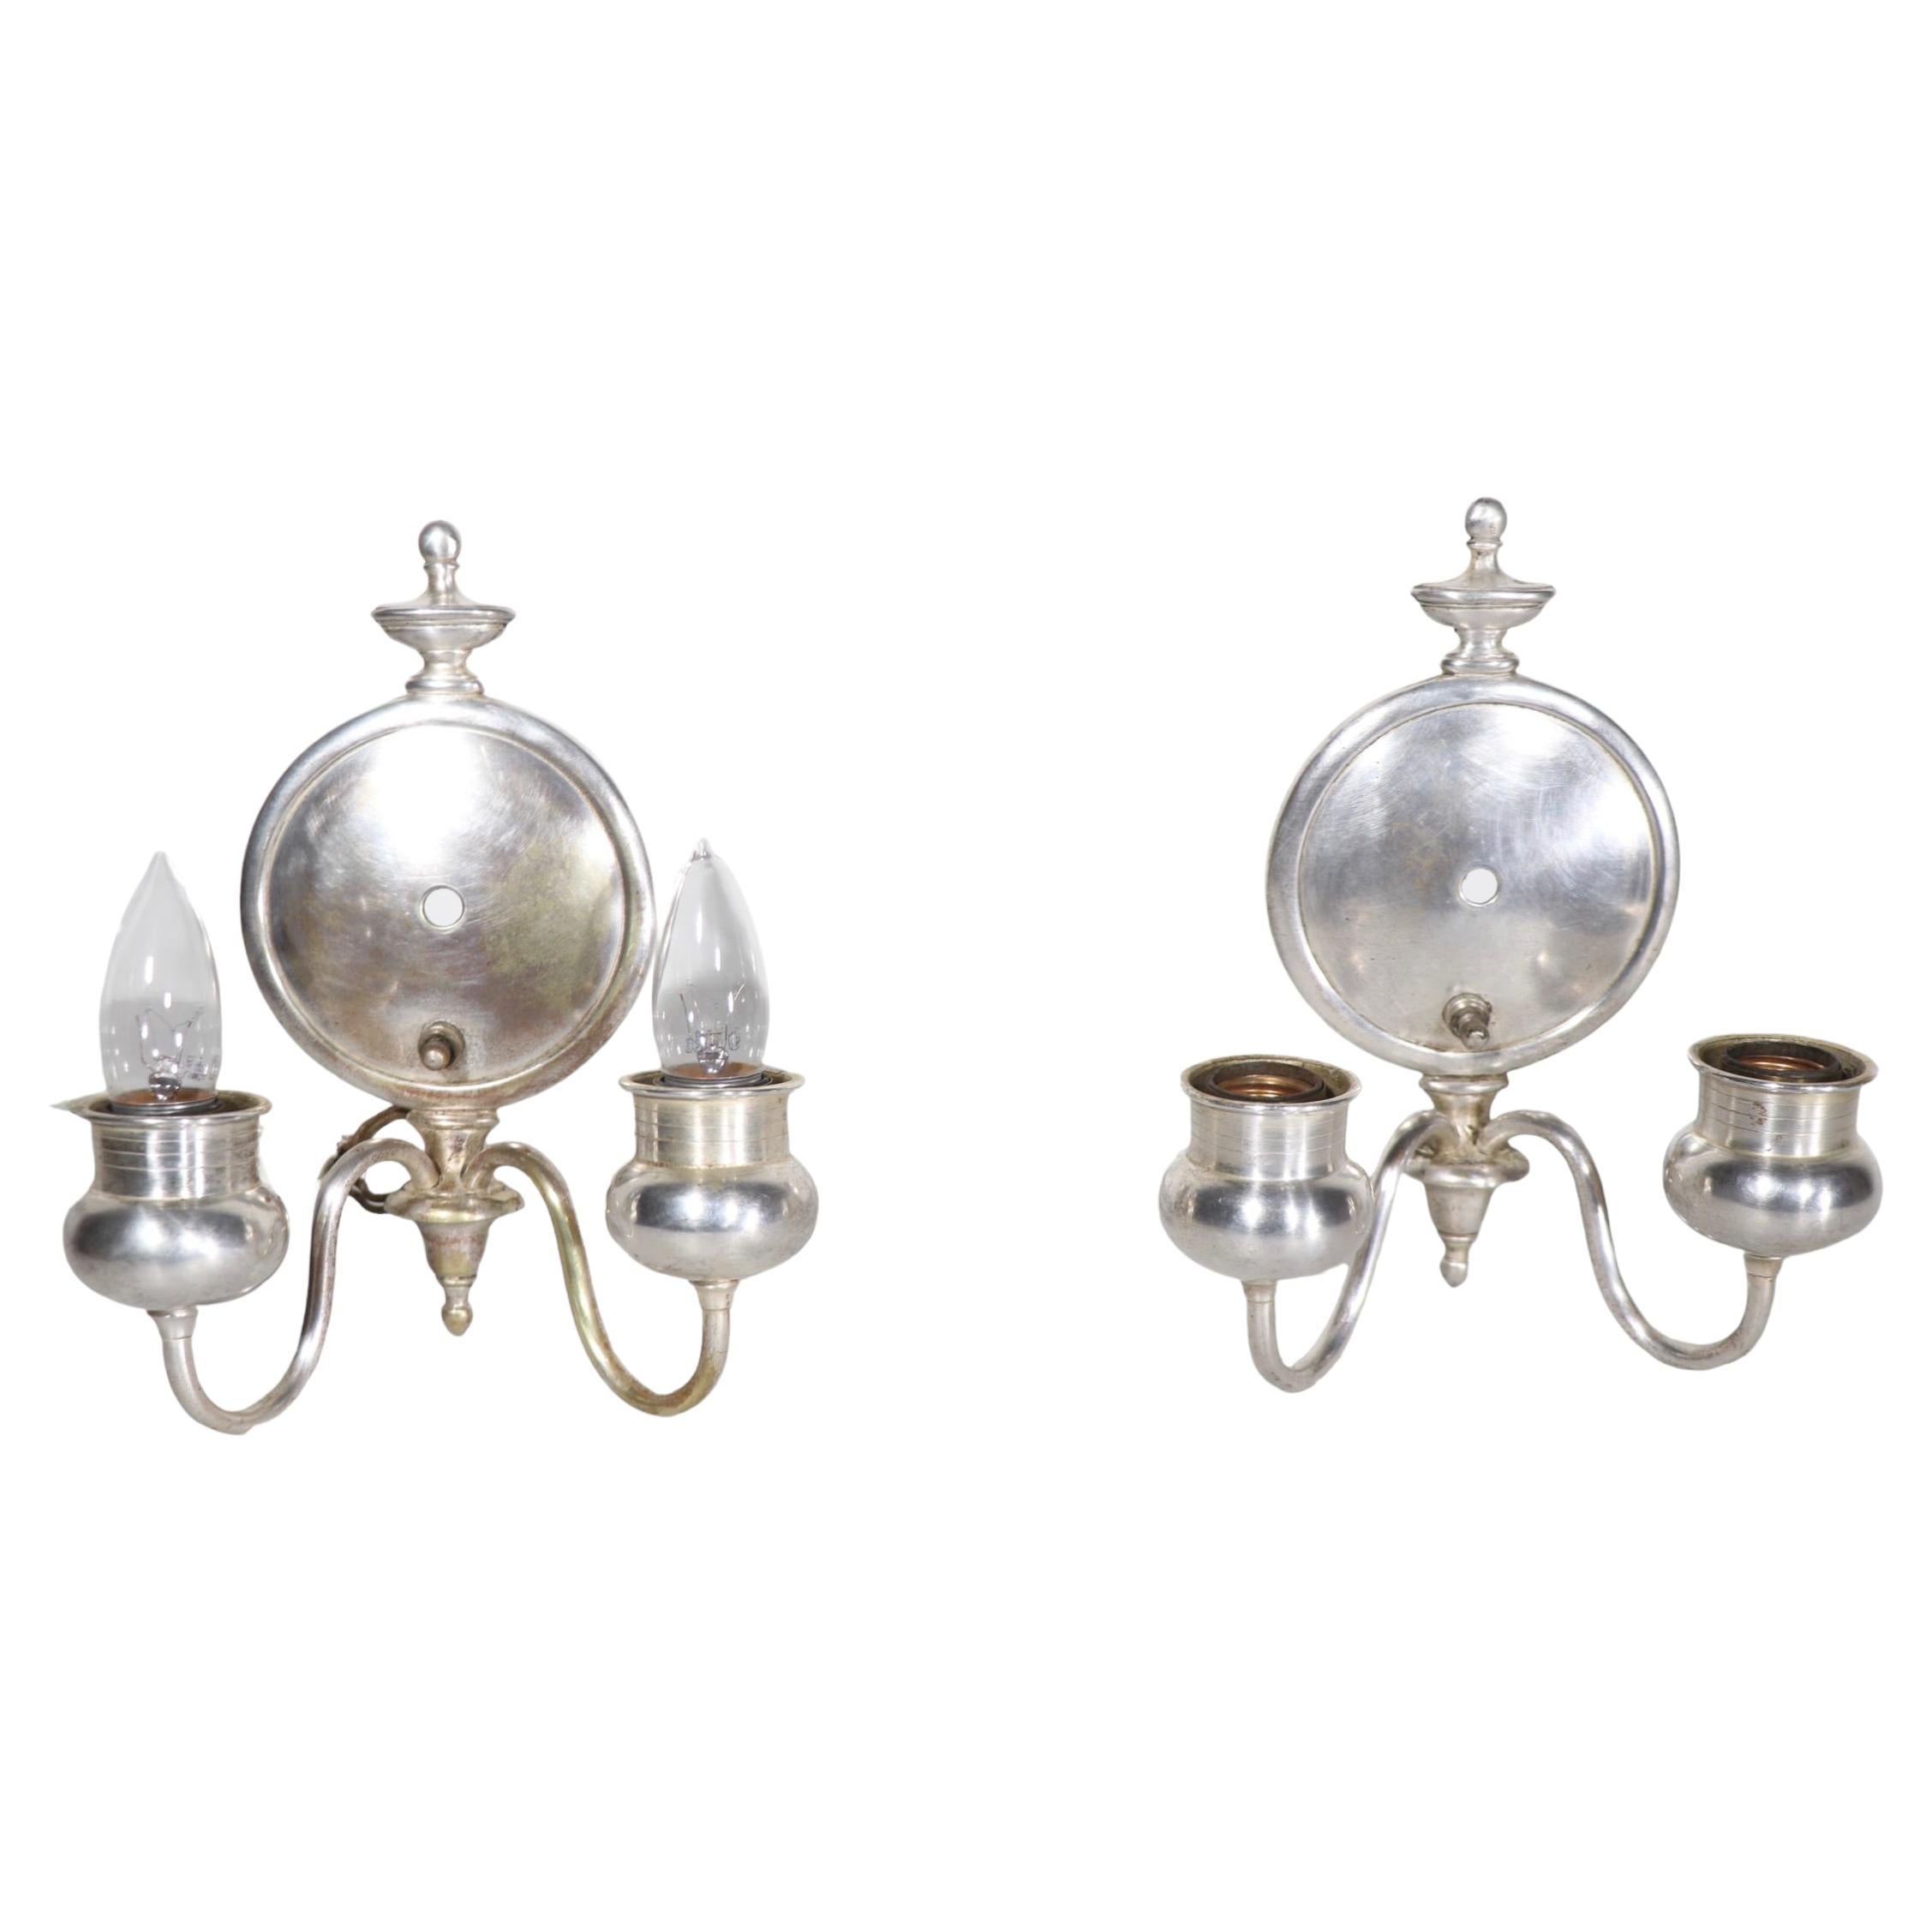 Pr.  Neo Classical Silver-Plate Sconces  For Sale